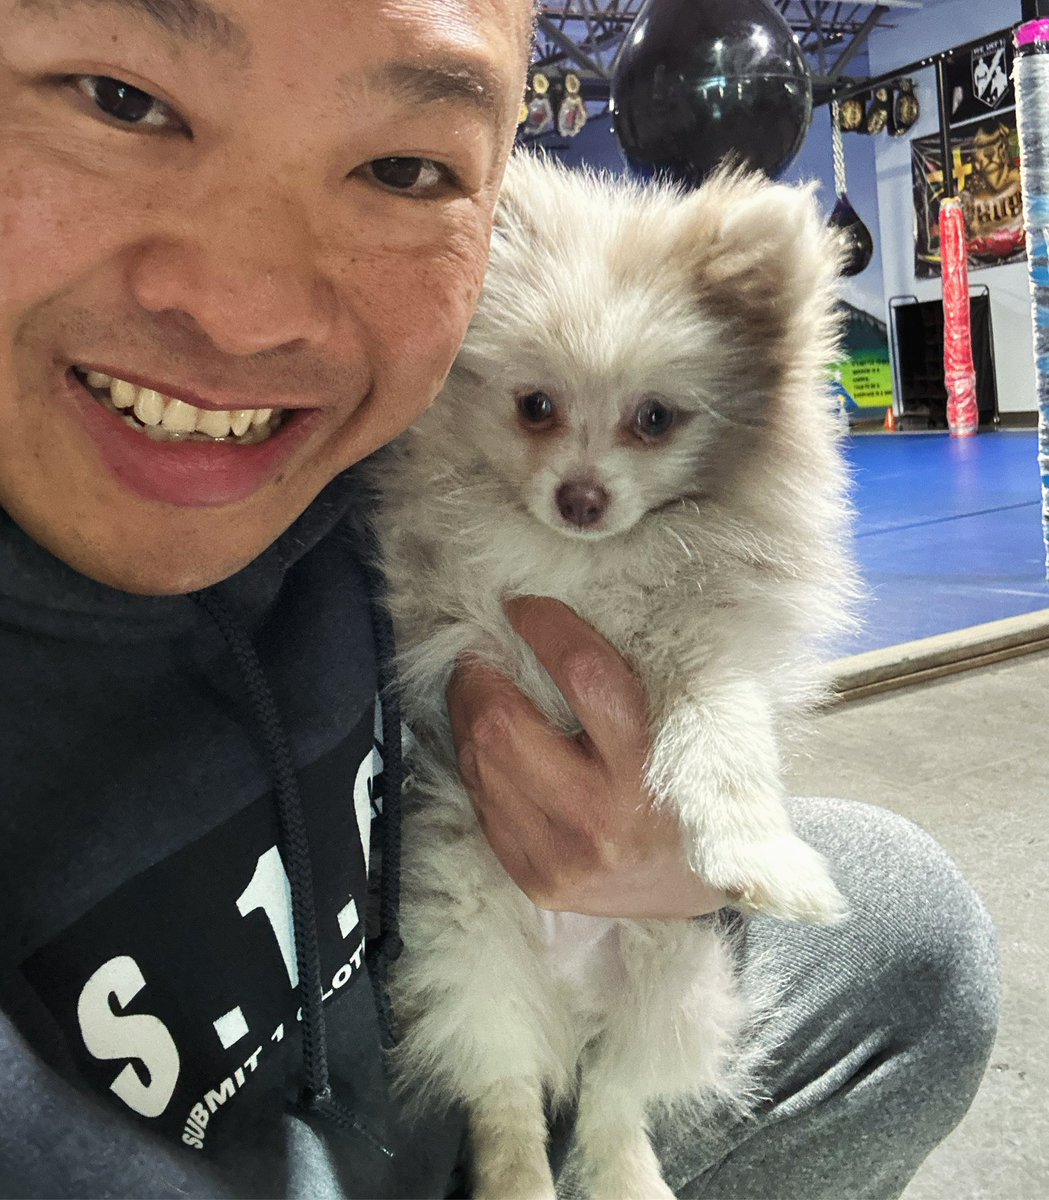 Mele kaliki maka and Feliz navidad from the newest 9th isle BJJ member !  What should his name be? #puppypower